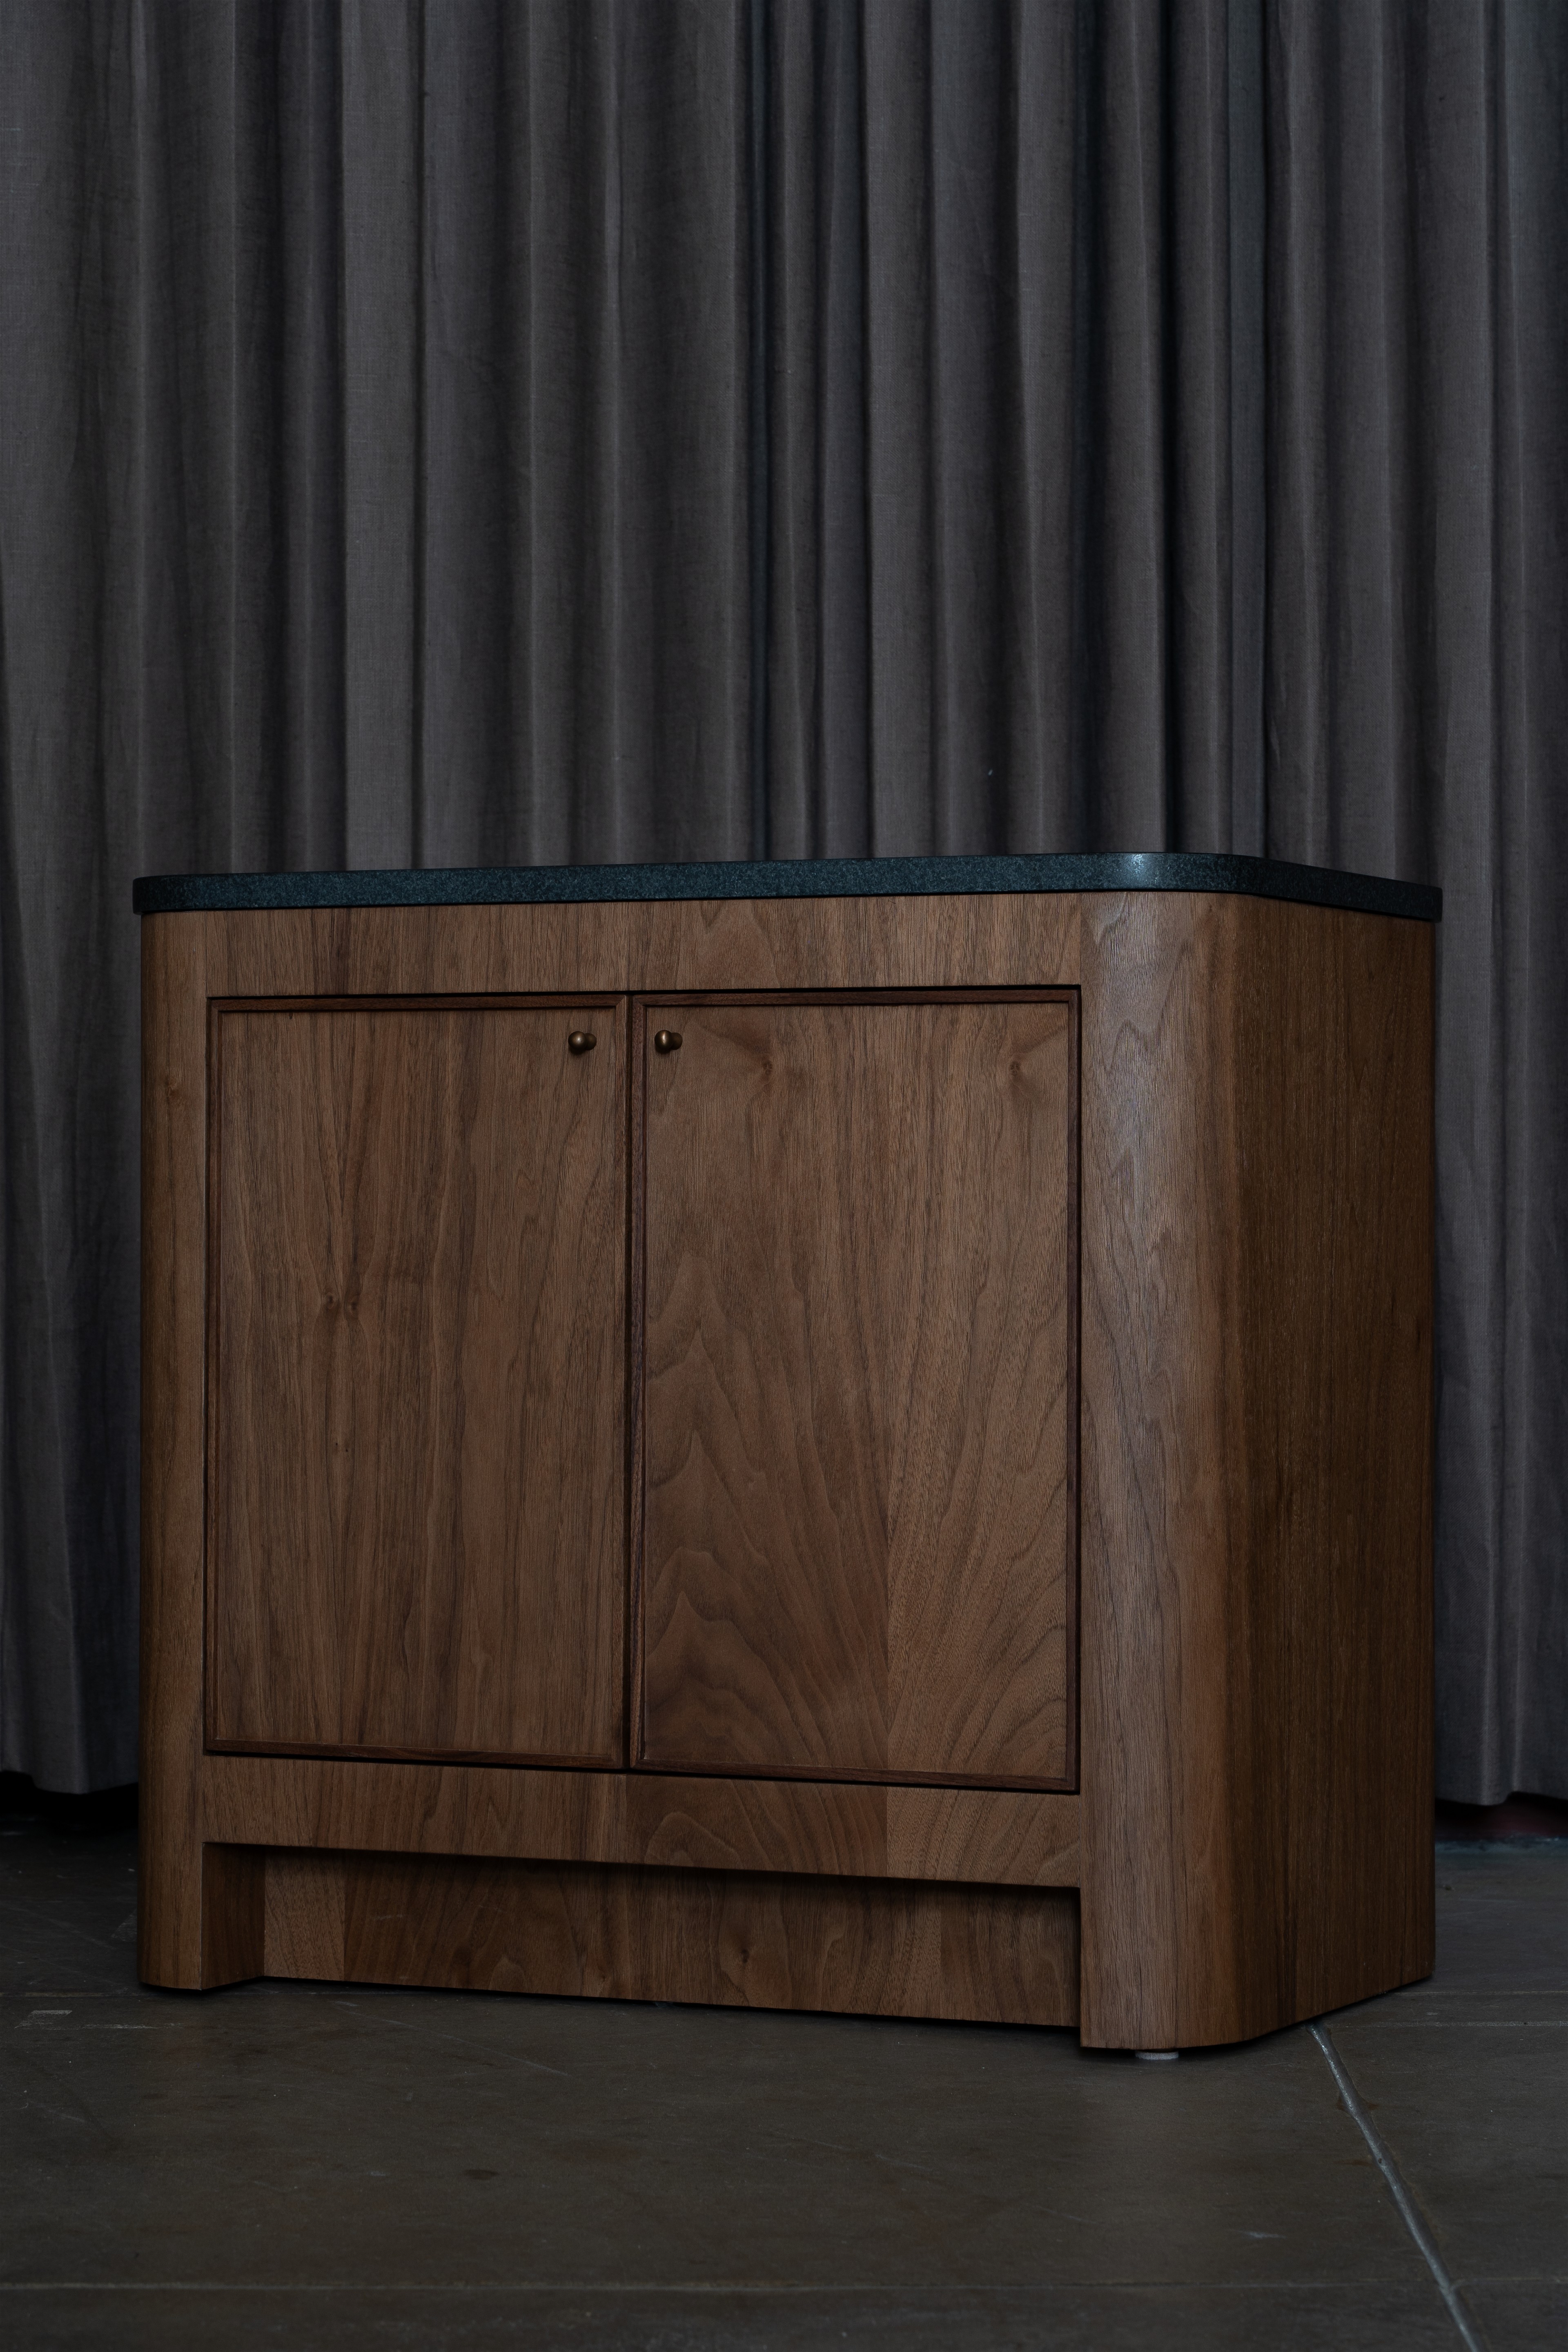 a wooden cabinet with a glass top in front of a curtain